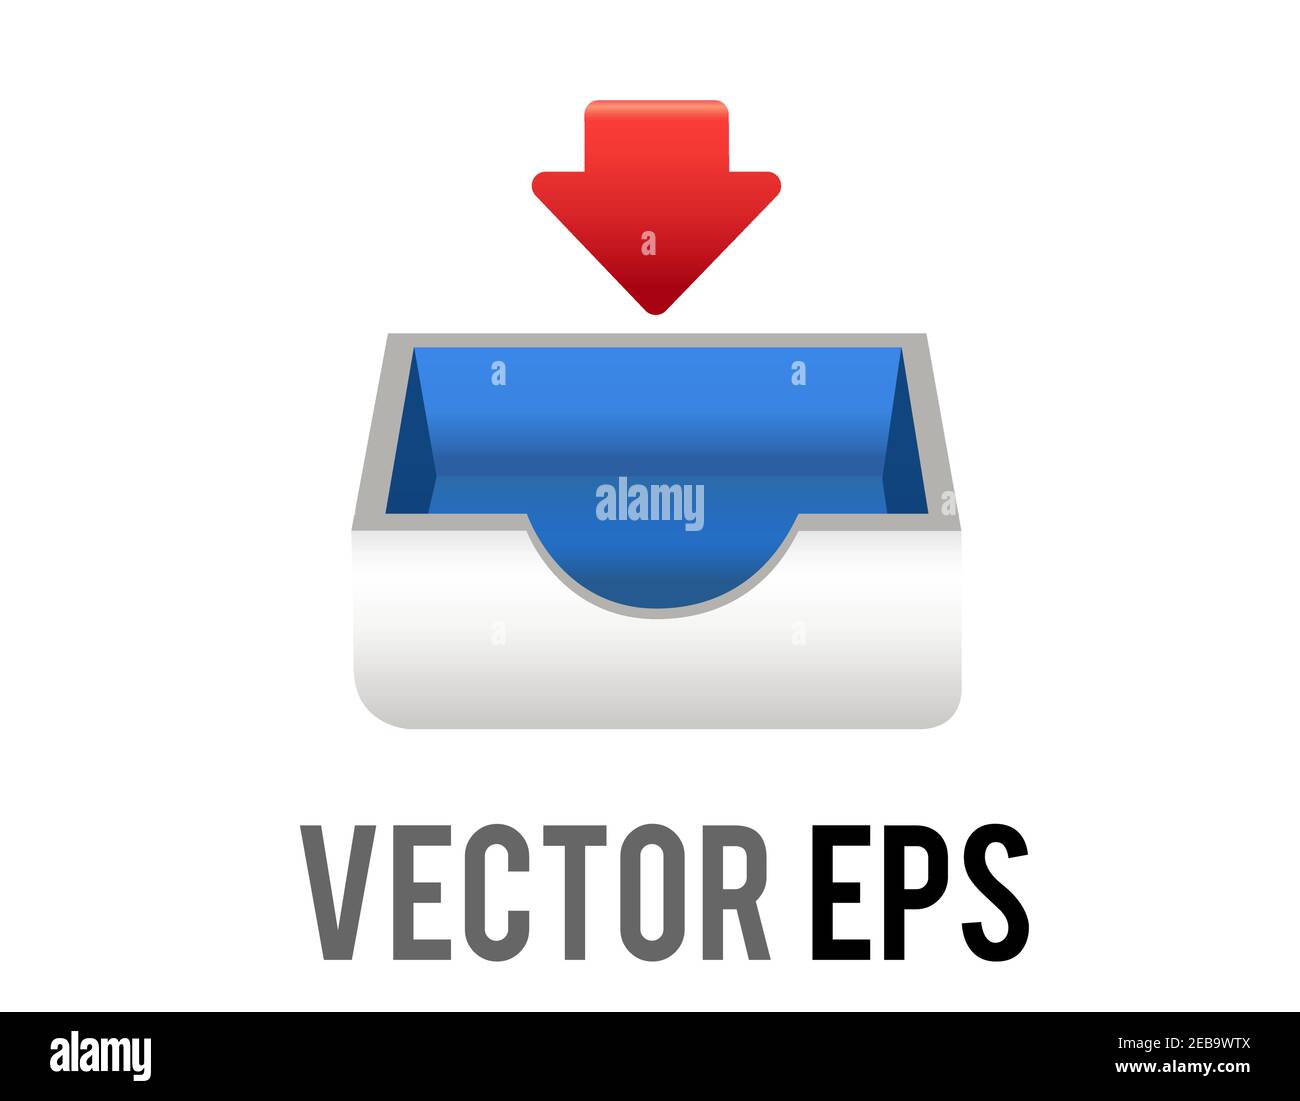 The isolated vector mail, document paper tray icon with red down arrow for email inbox, used for digital activity, downloading, messaging and emailing Stock Vector